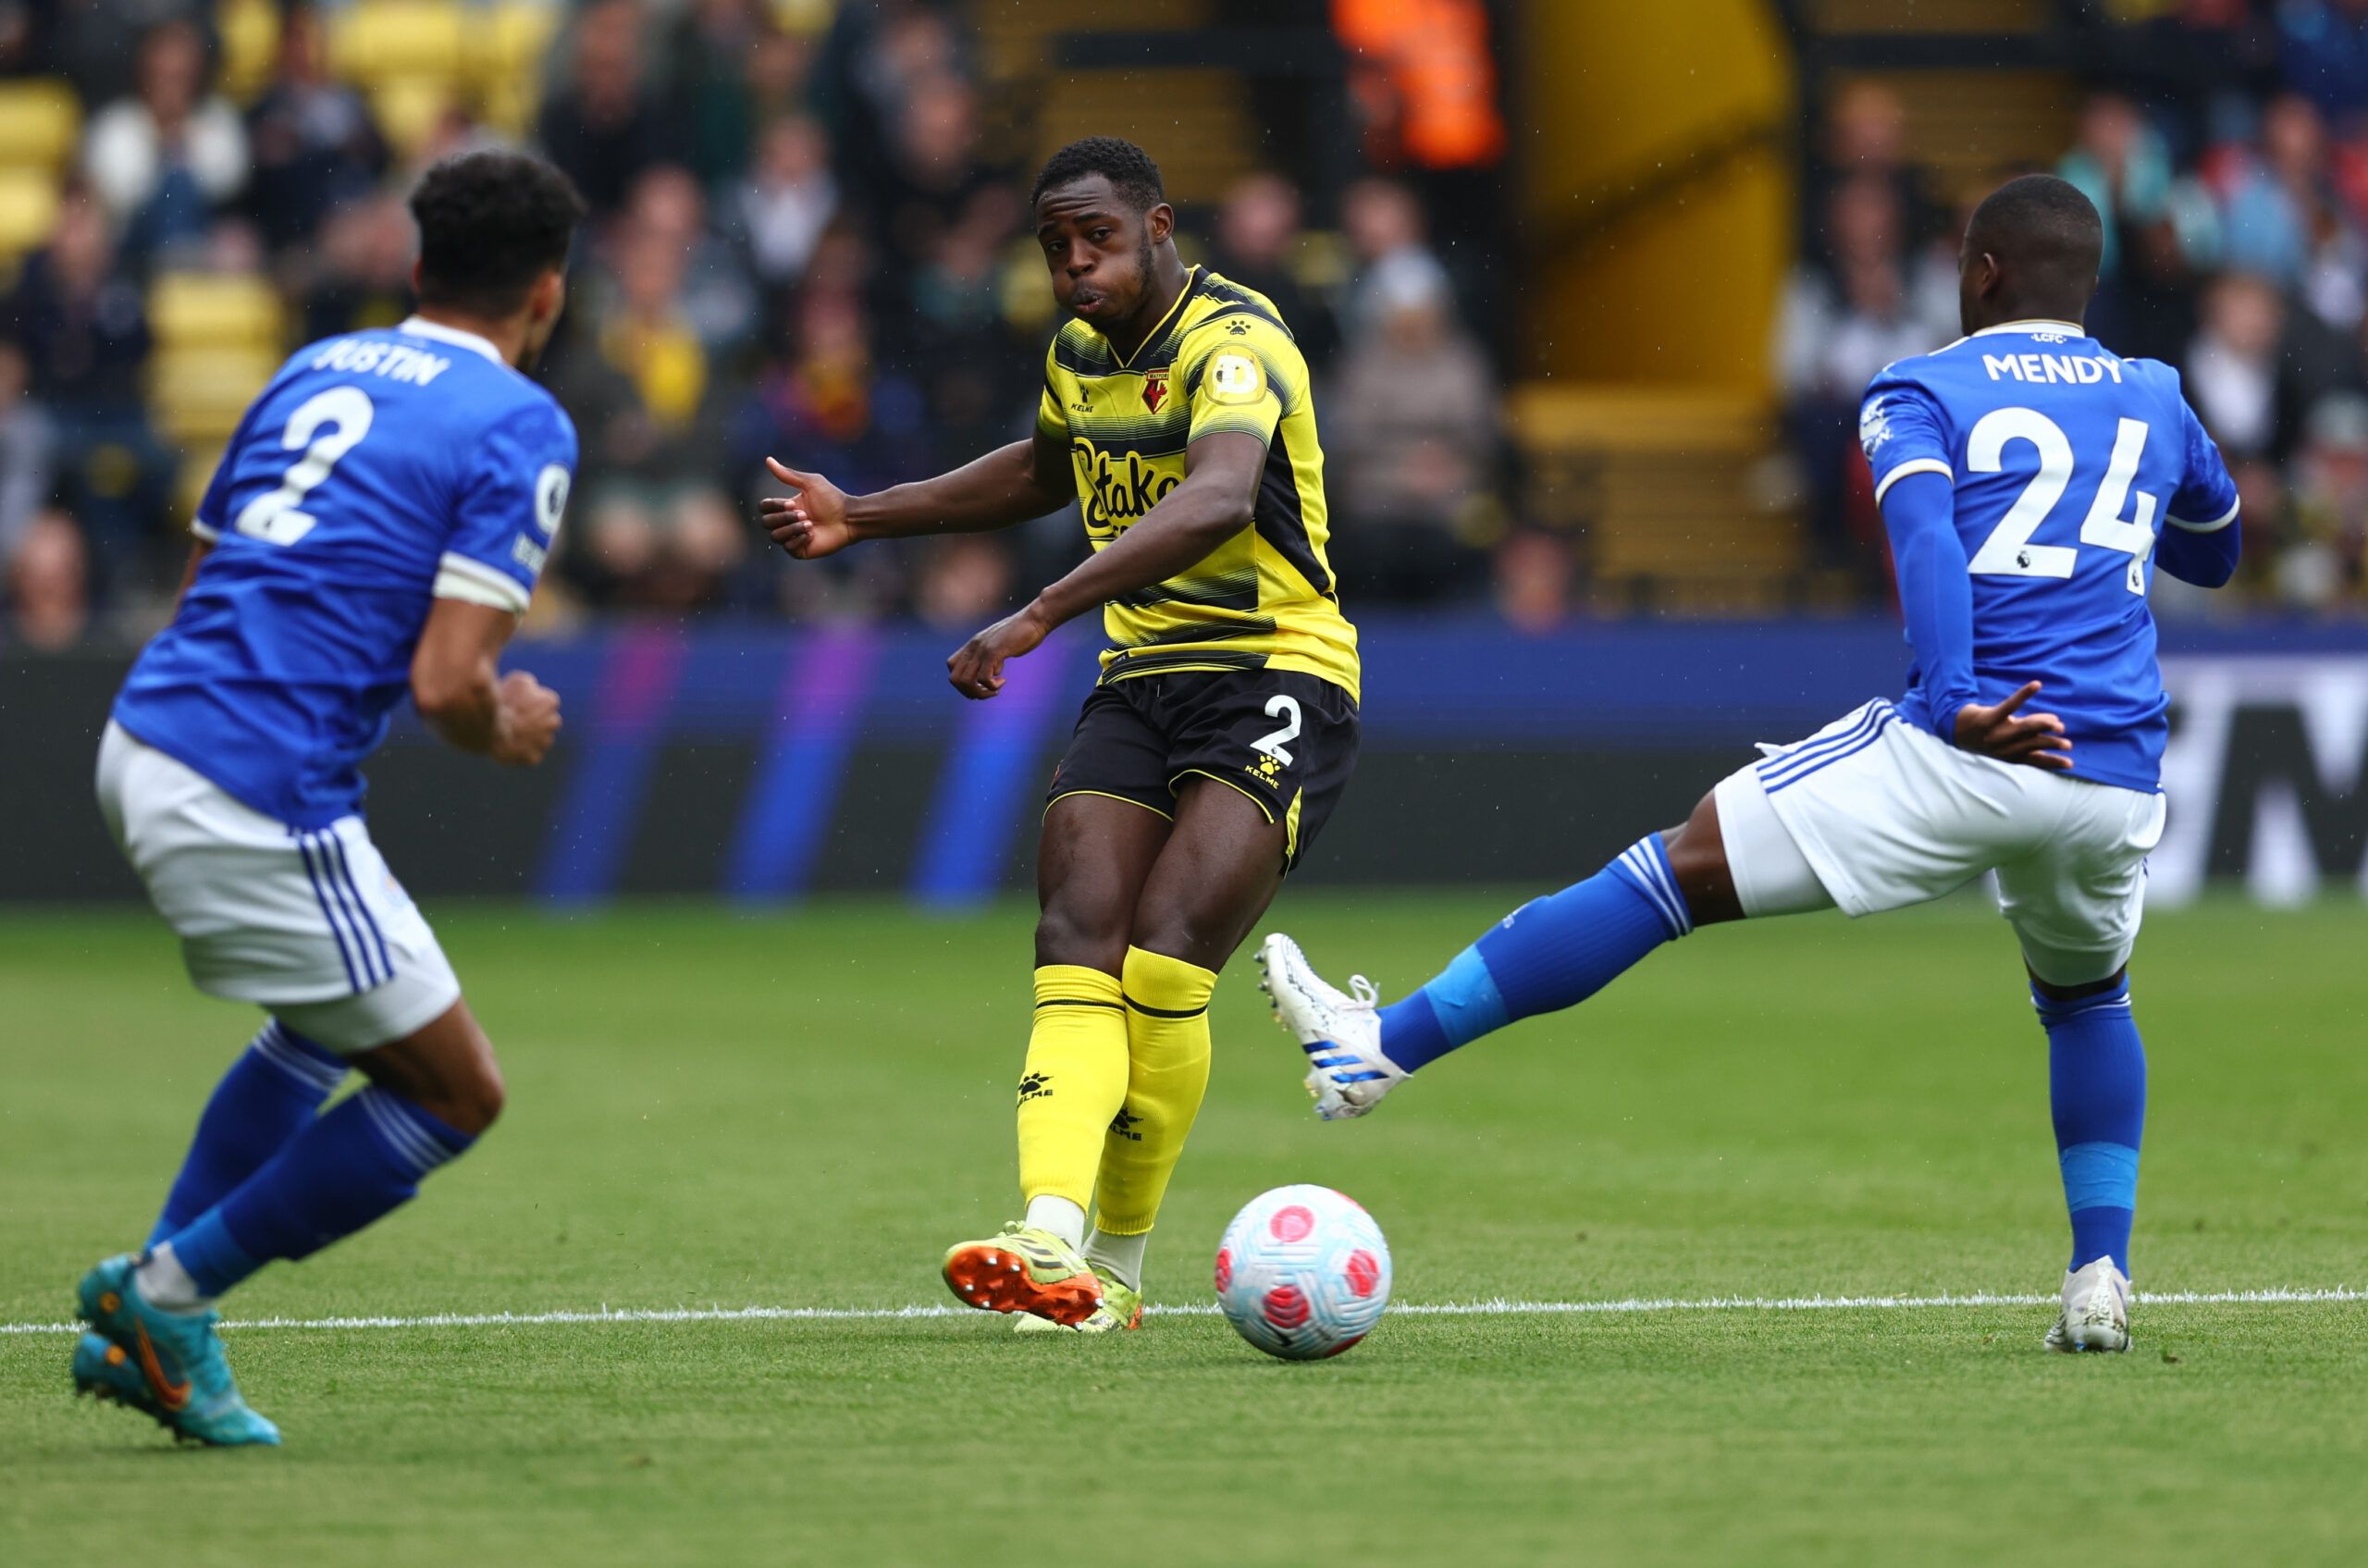 Soccer Football - Premier League - Watford v Leicester City - Vicarage Road, Watford, Britain - May 15, 2022 Watford's Jeremy Ngakia in action with Leicester City's Nampalys Mendy REUTERS/David Klein EDITORIAL USE ONLY. No use with unauthorized audio, video, data, fixture lists, club/league logos or 'live' services. Online in-match use limited to 75 images, no video emulation. No use in betting, games or single club /league/player publications.  Please contact your account representative for fur